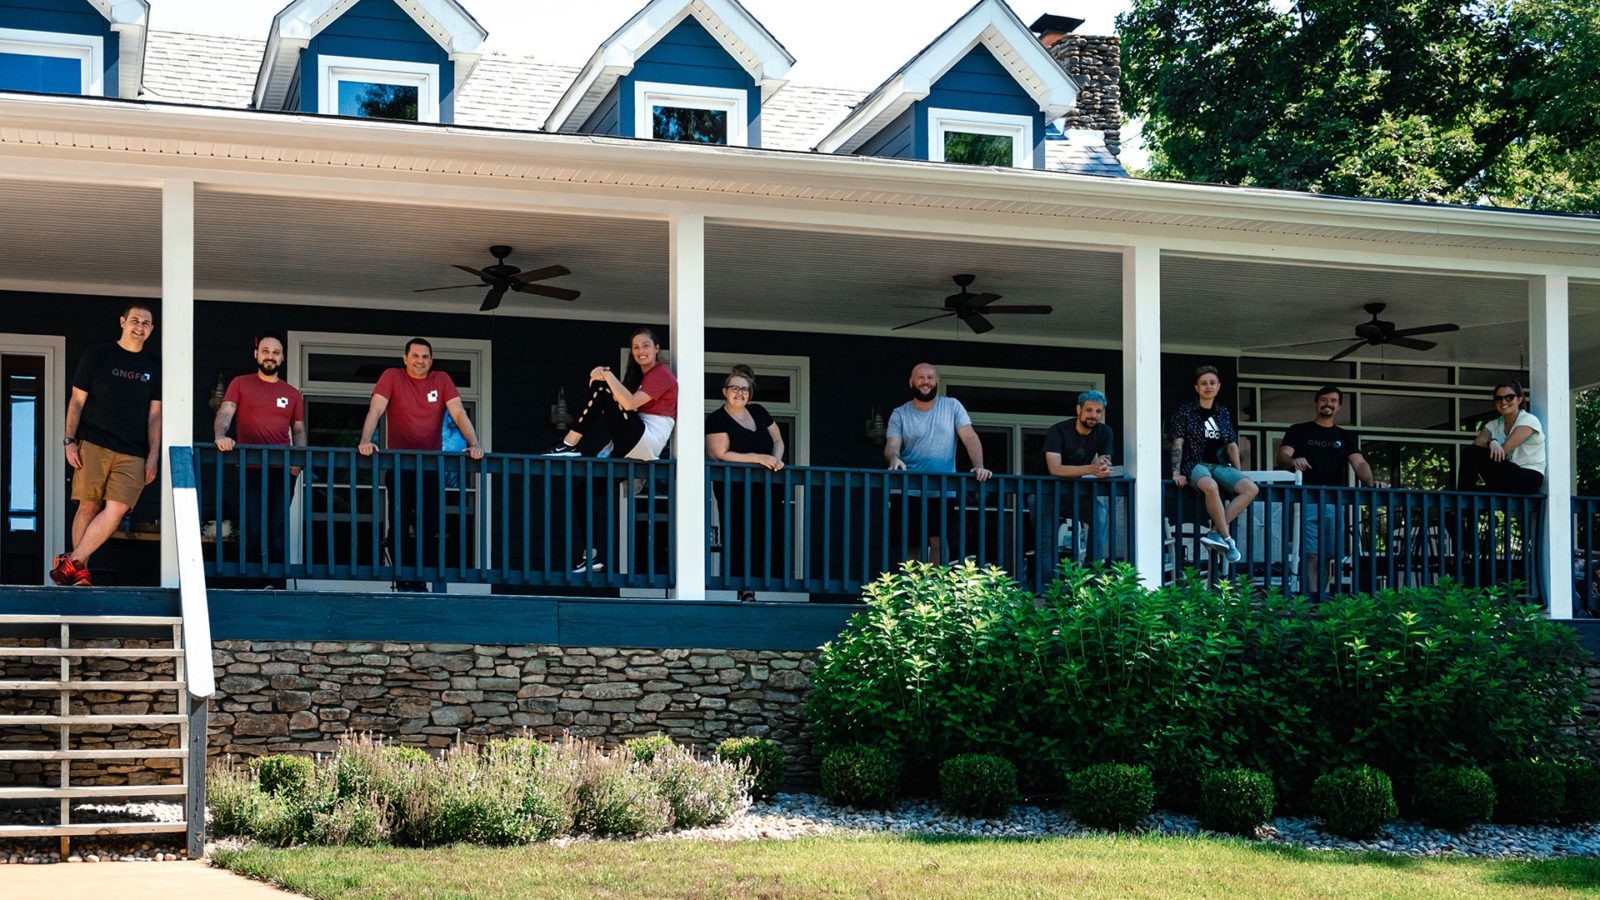 Multiple people standing on a porch facing the camera